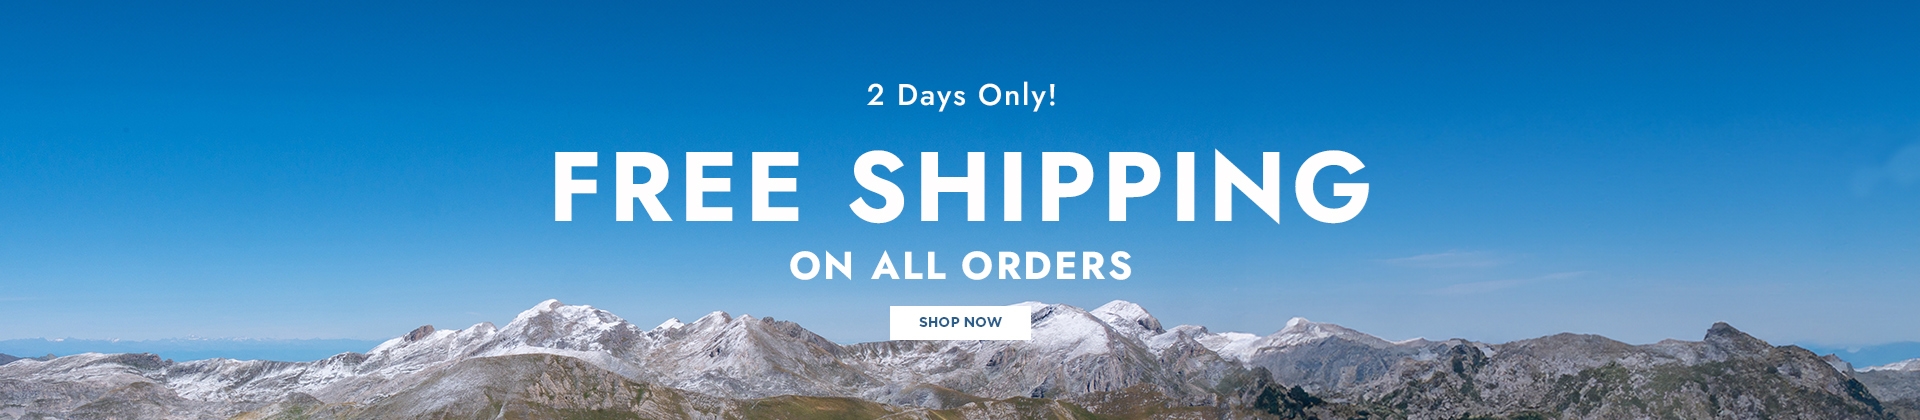 H1: Free Shipping On All Orders